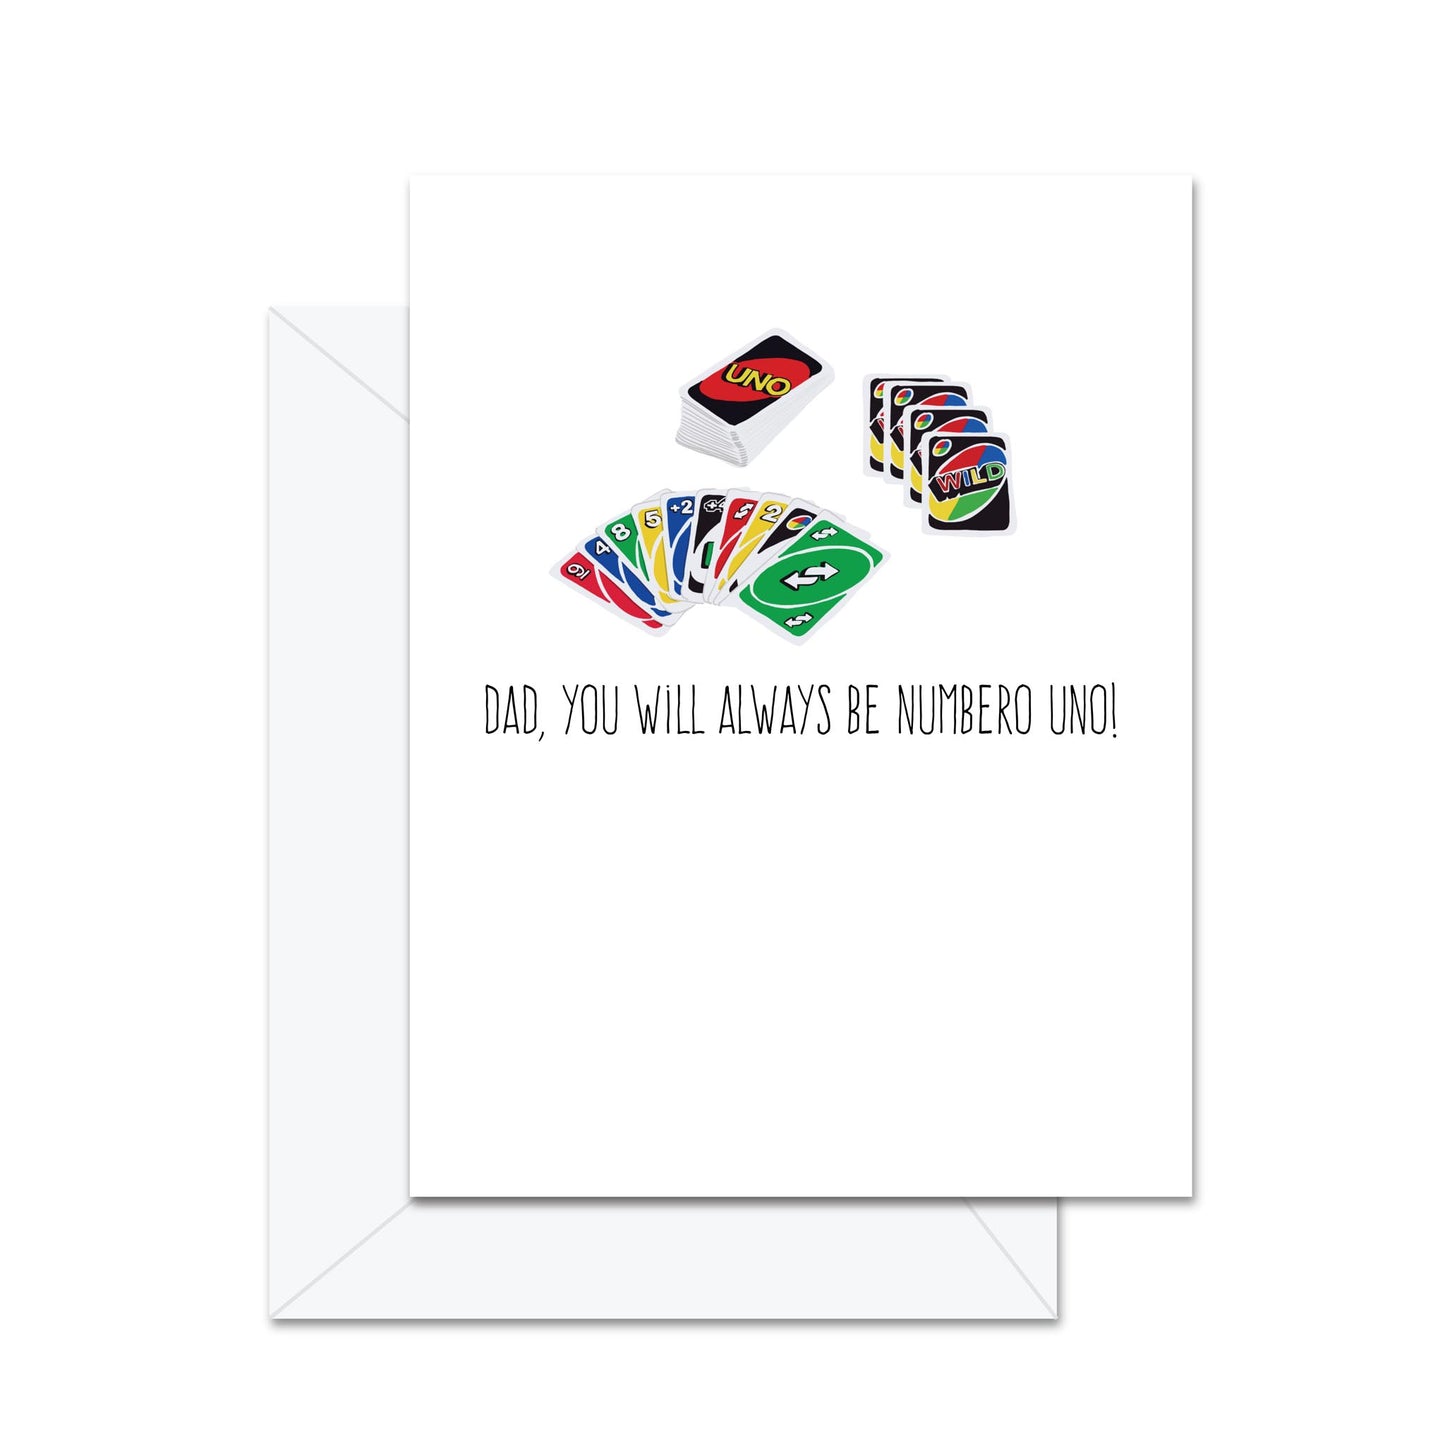 Dad You Will Always Be My Numero Uno! - Greeting Card